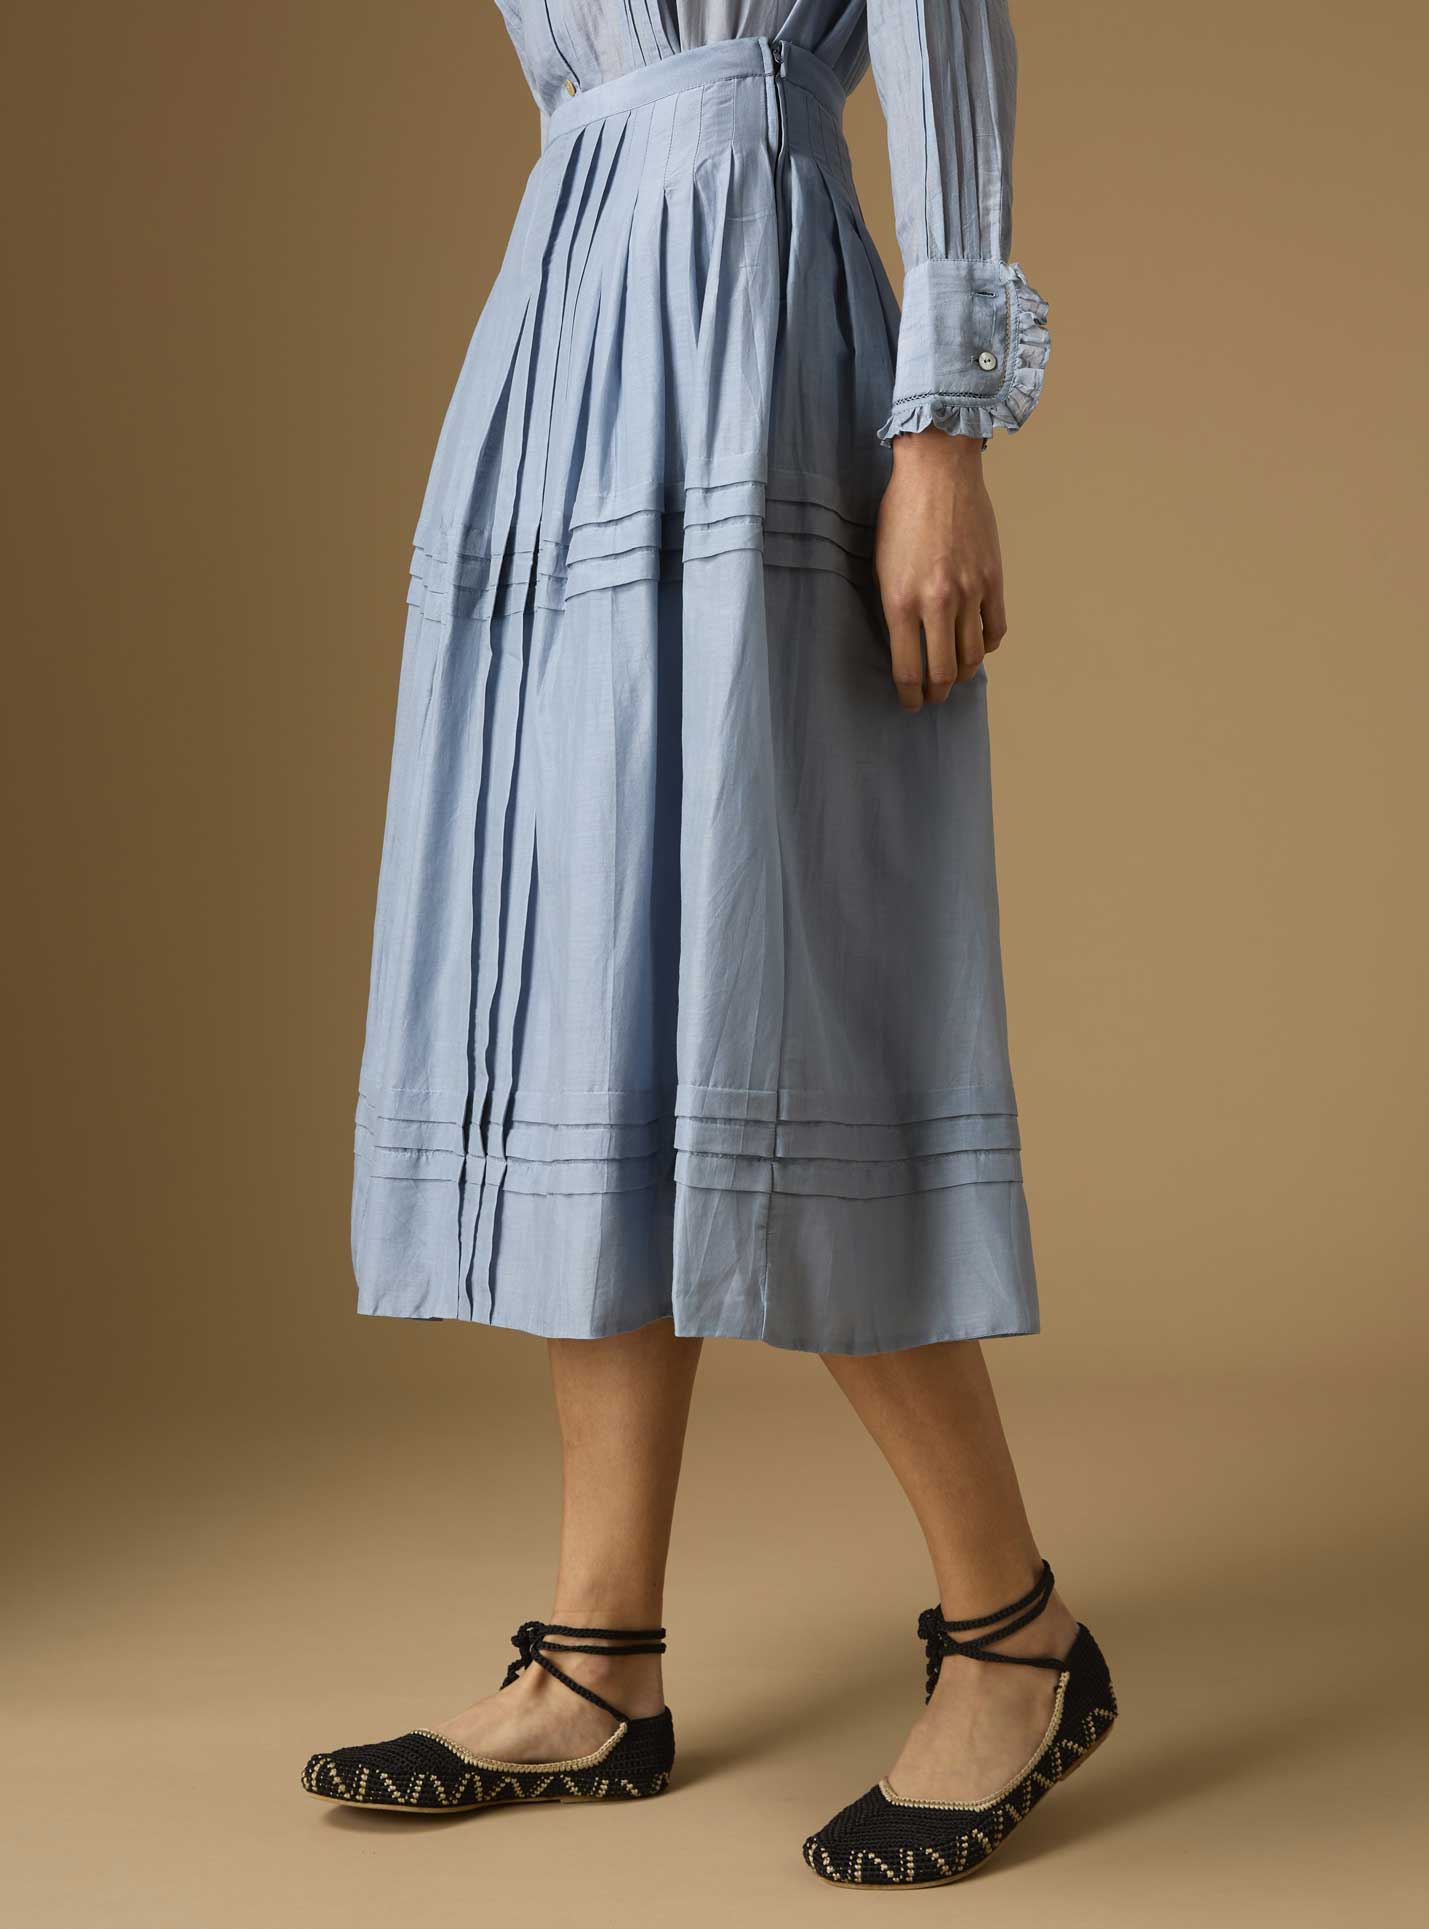 Zazou blue grey skirt is crafted in a soft and light cotton-silk fabric Thierry Colson view side